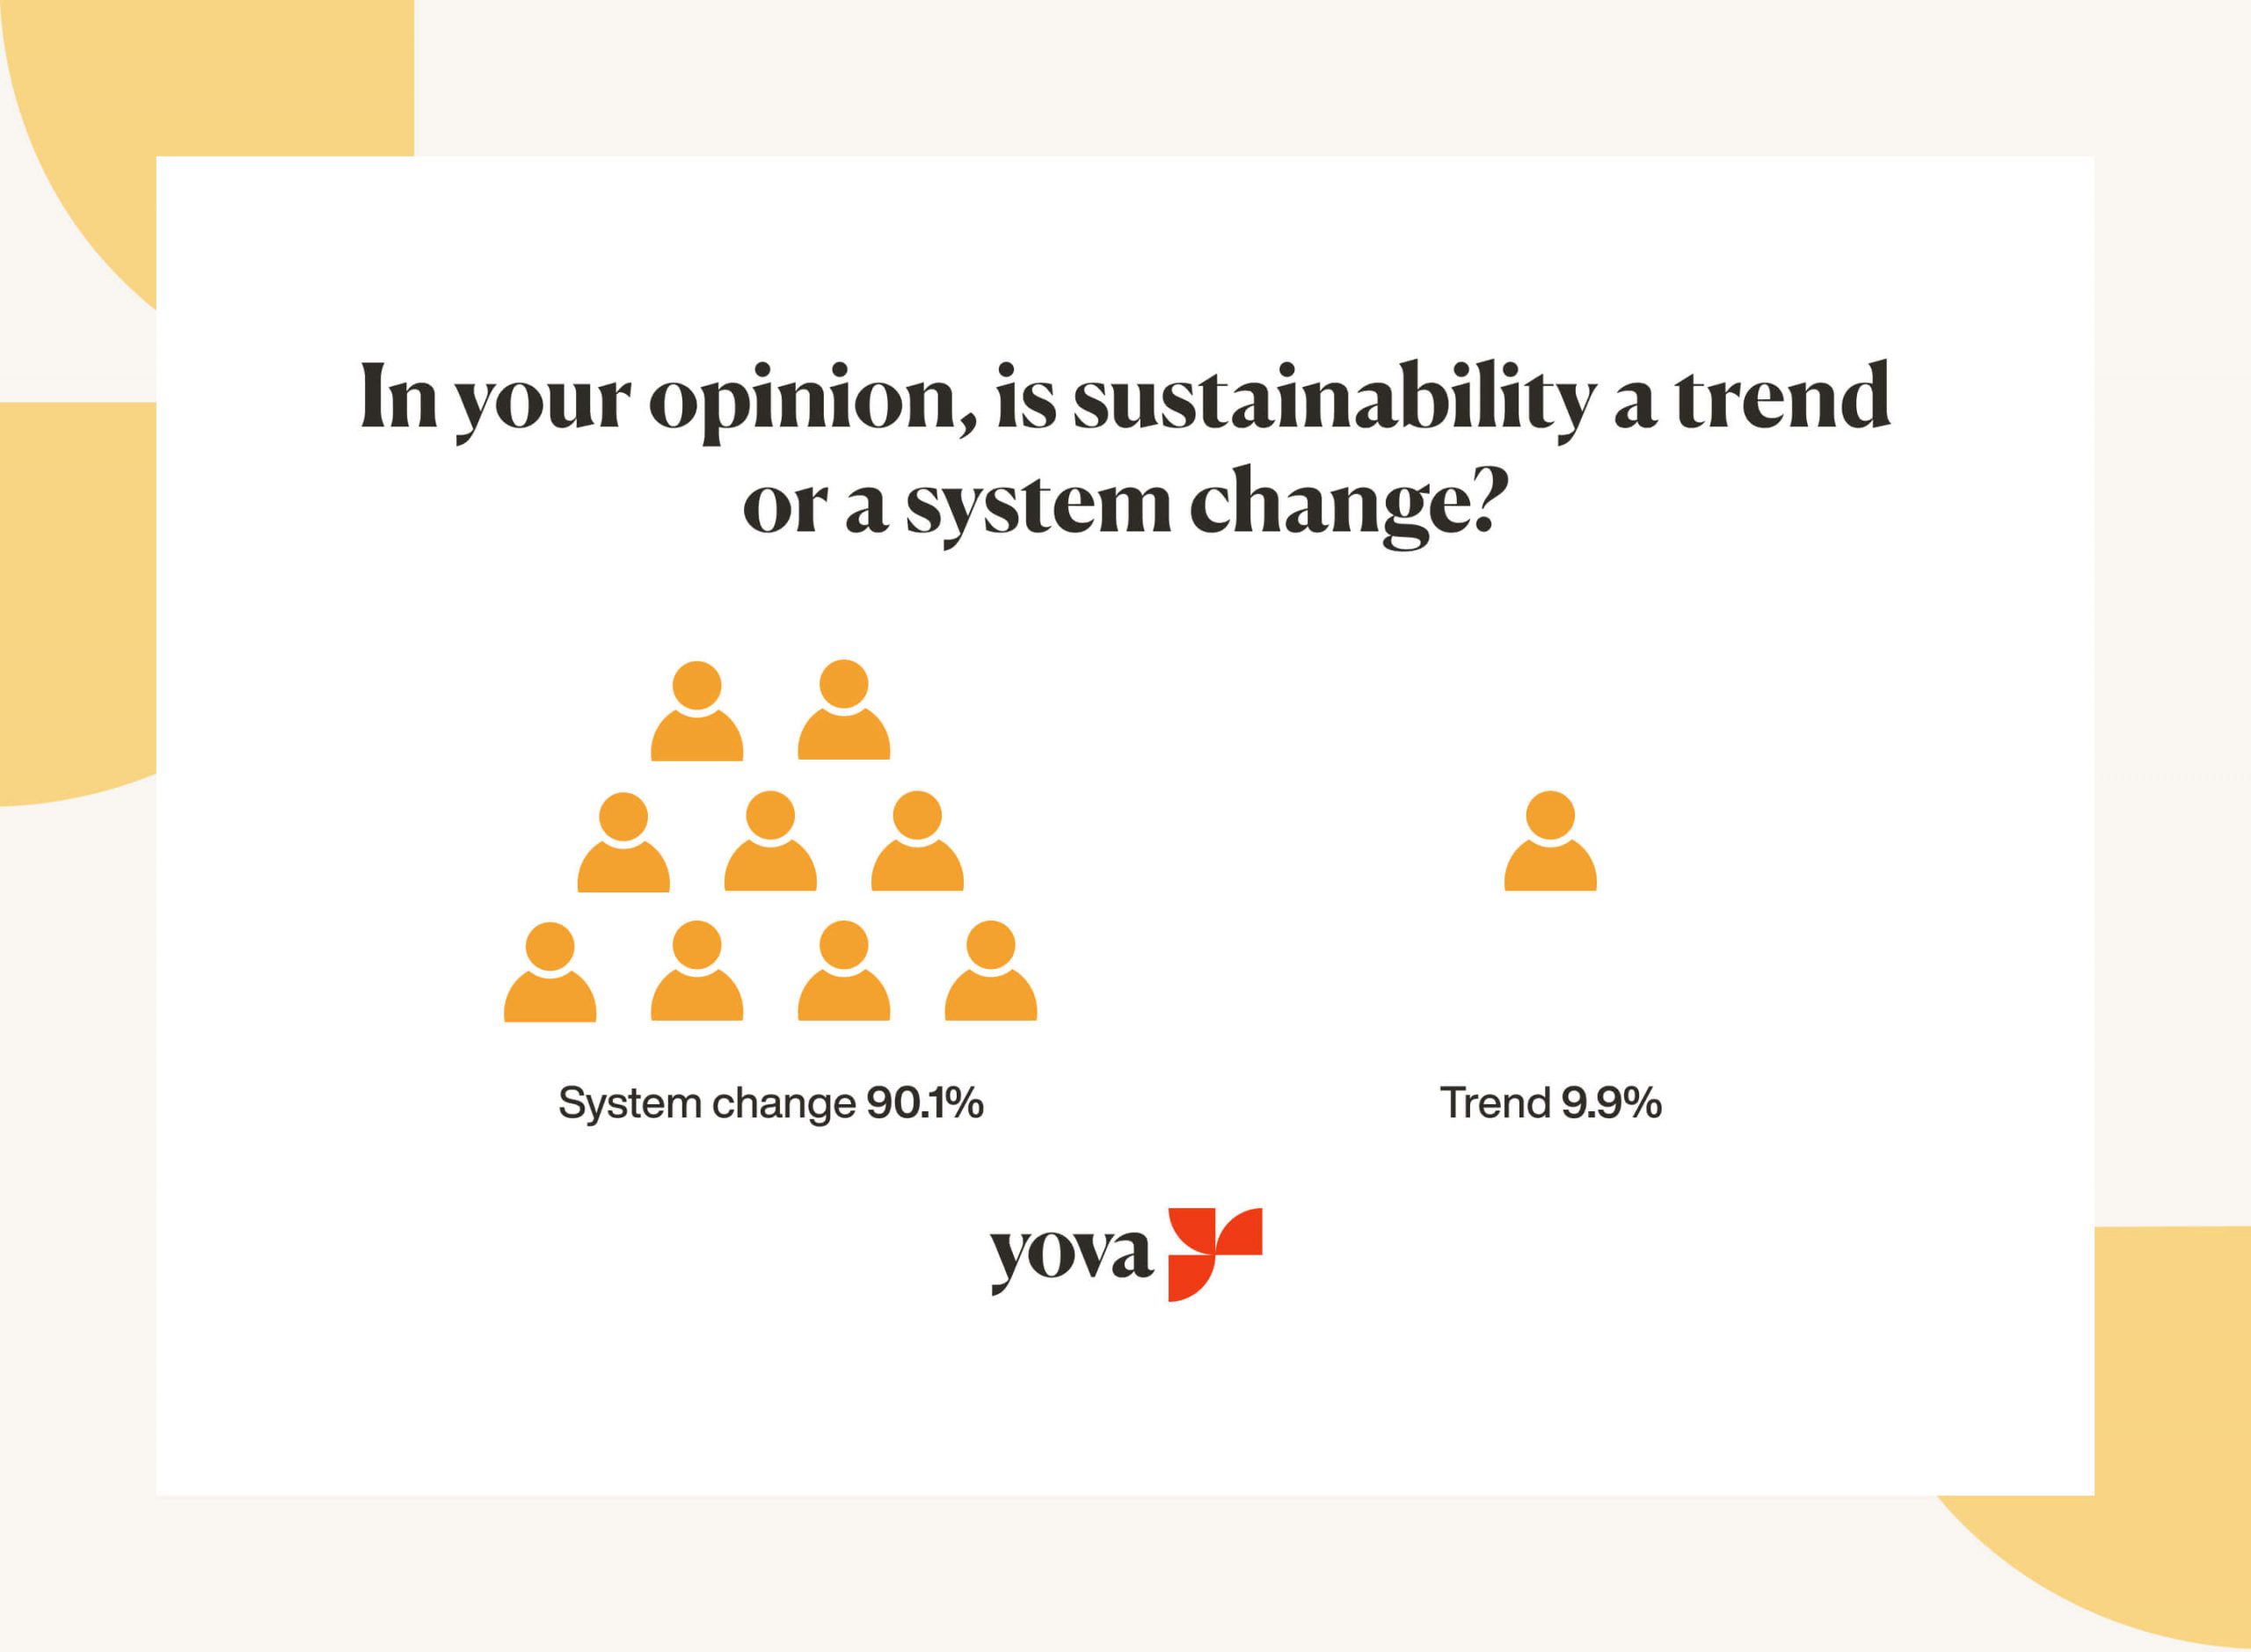 Graph showing if sustainability is a trend or systemic change